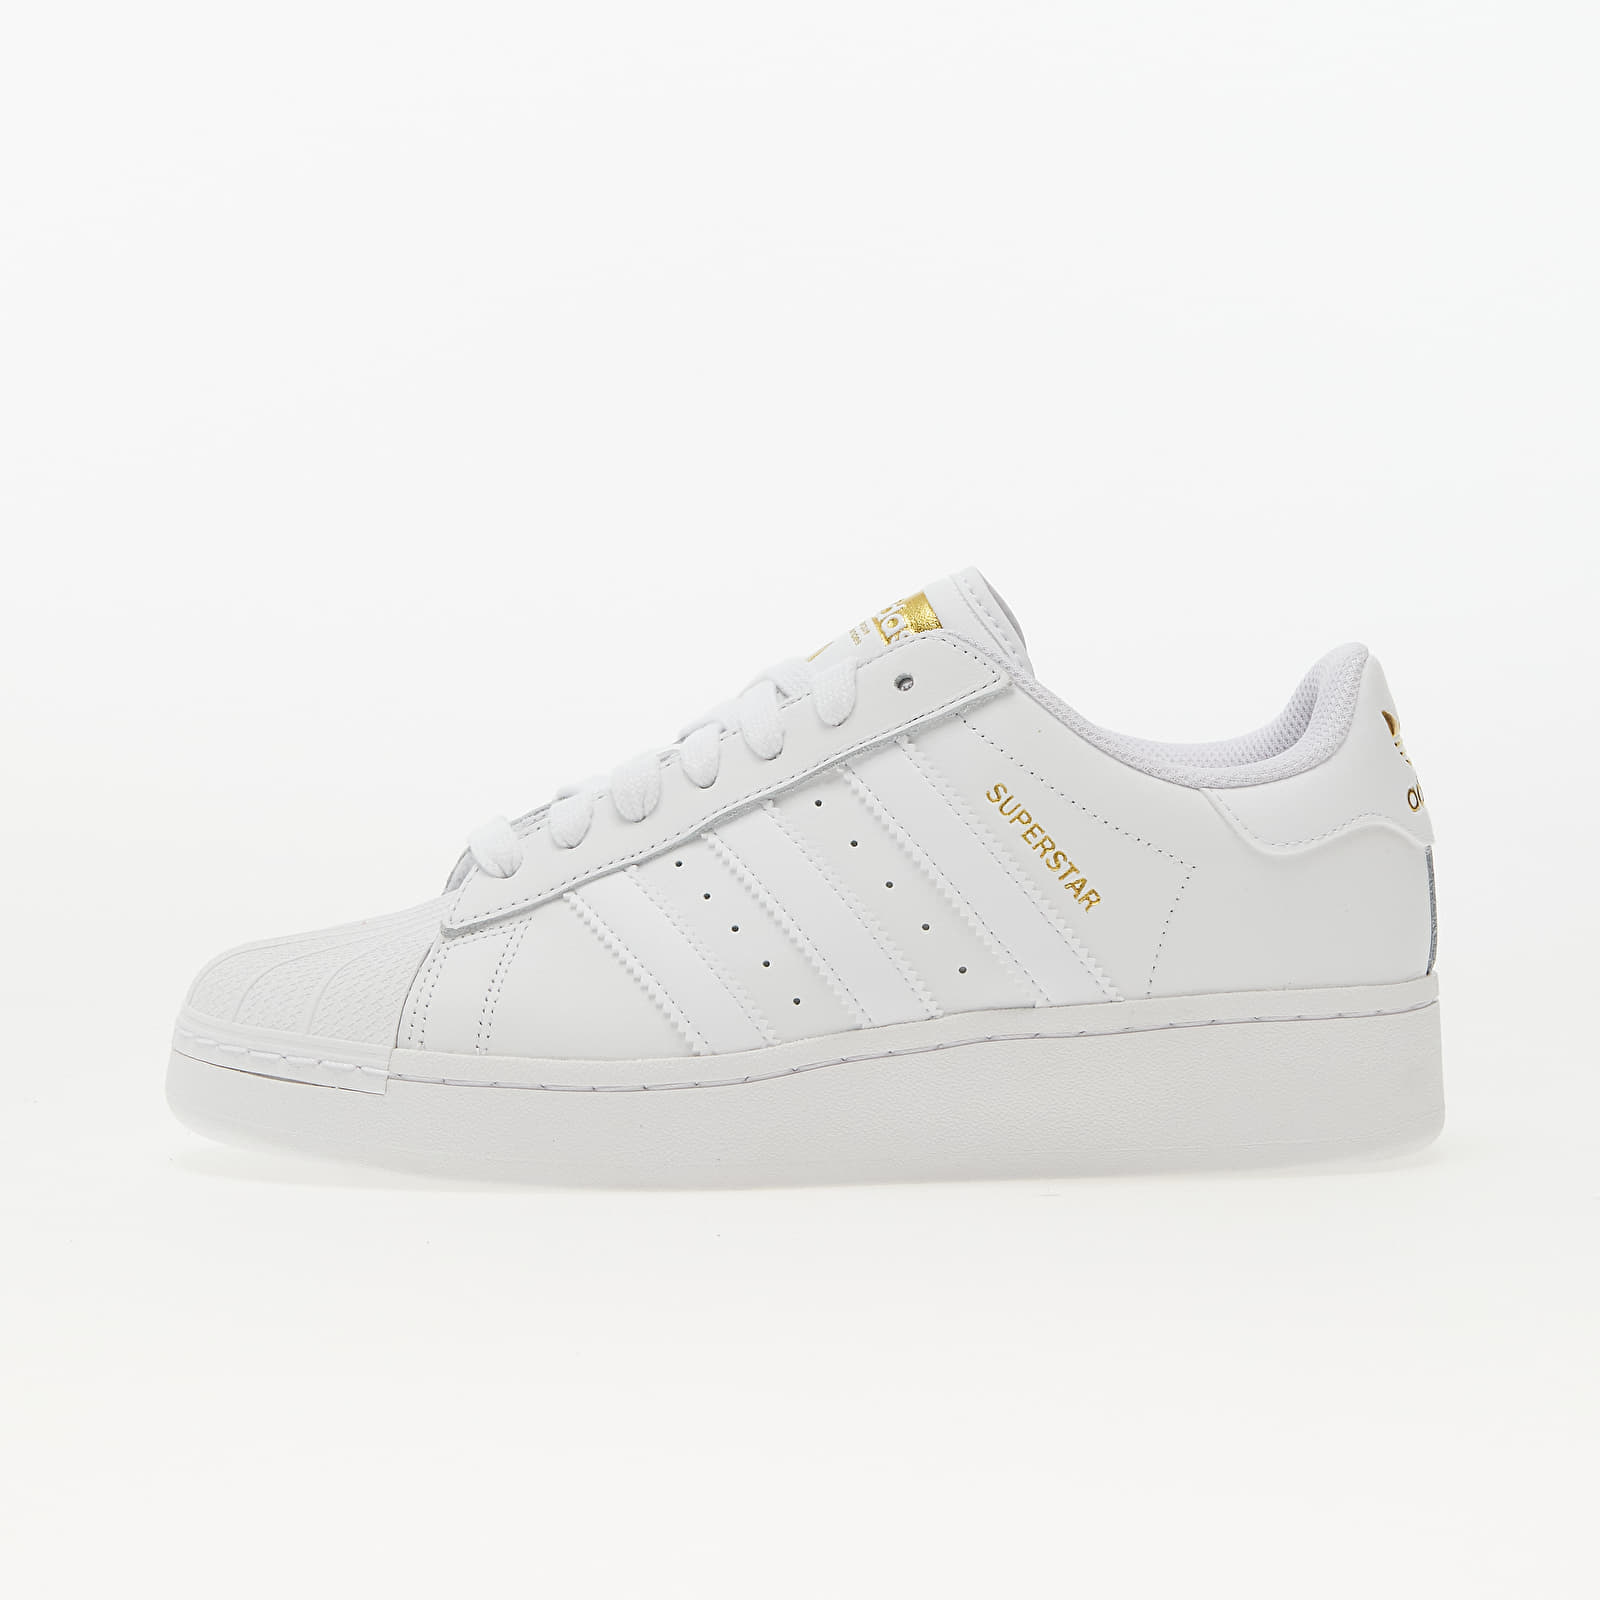 Men's shoes adidas Superstar Xlg Ftw White/ Ftw White/ Gold Metallic